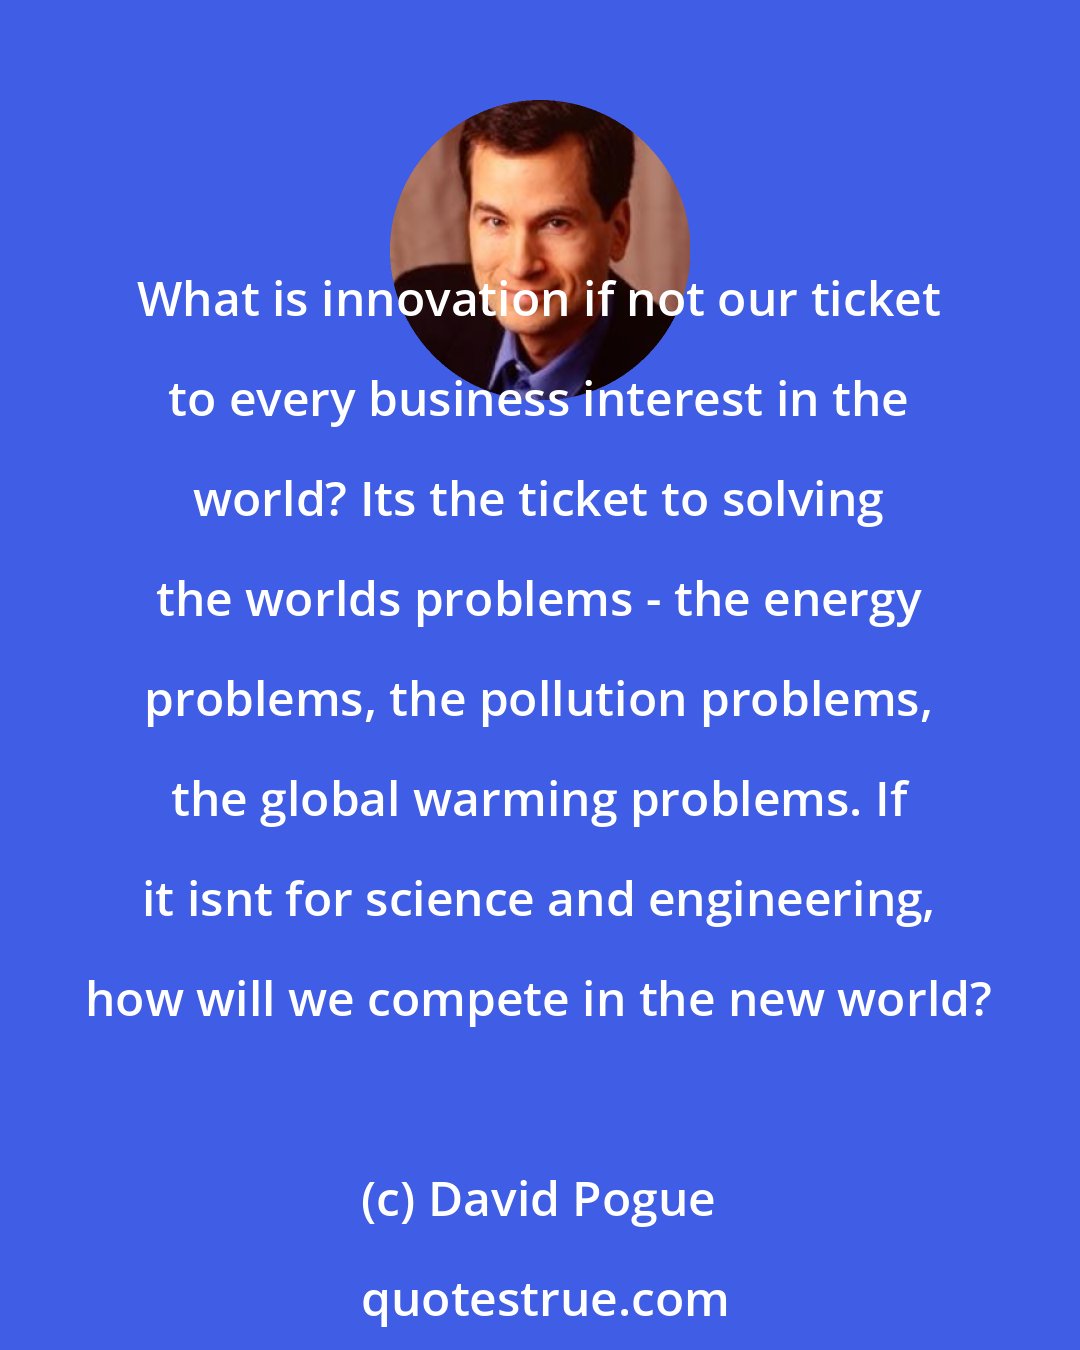 David Pogue: What is innovation if not our ticket to every business interest in the world? Its the ticket to solving the worlds problems - the energy problems, the pollution problems, the global warming problems. If it isnt for science and engineering, how will we compete in the new world?